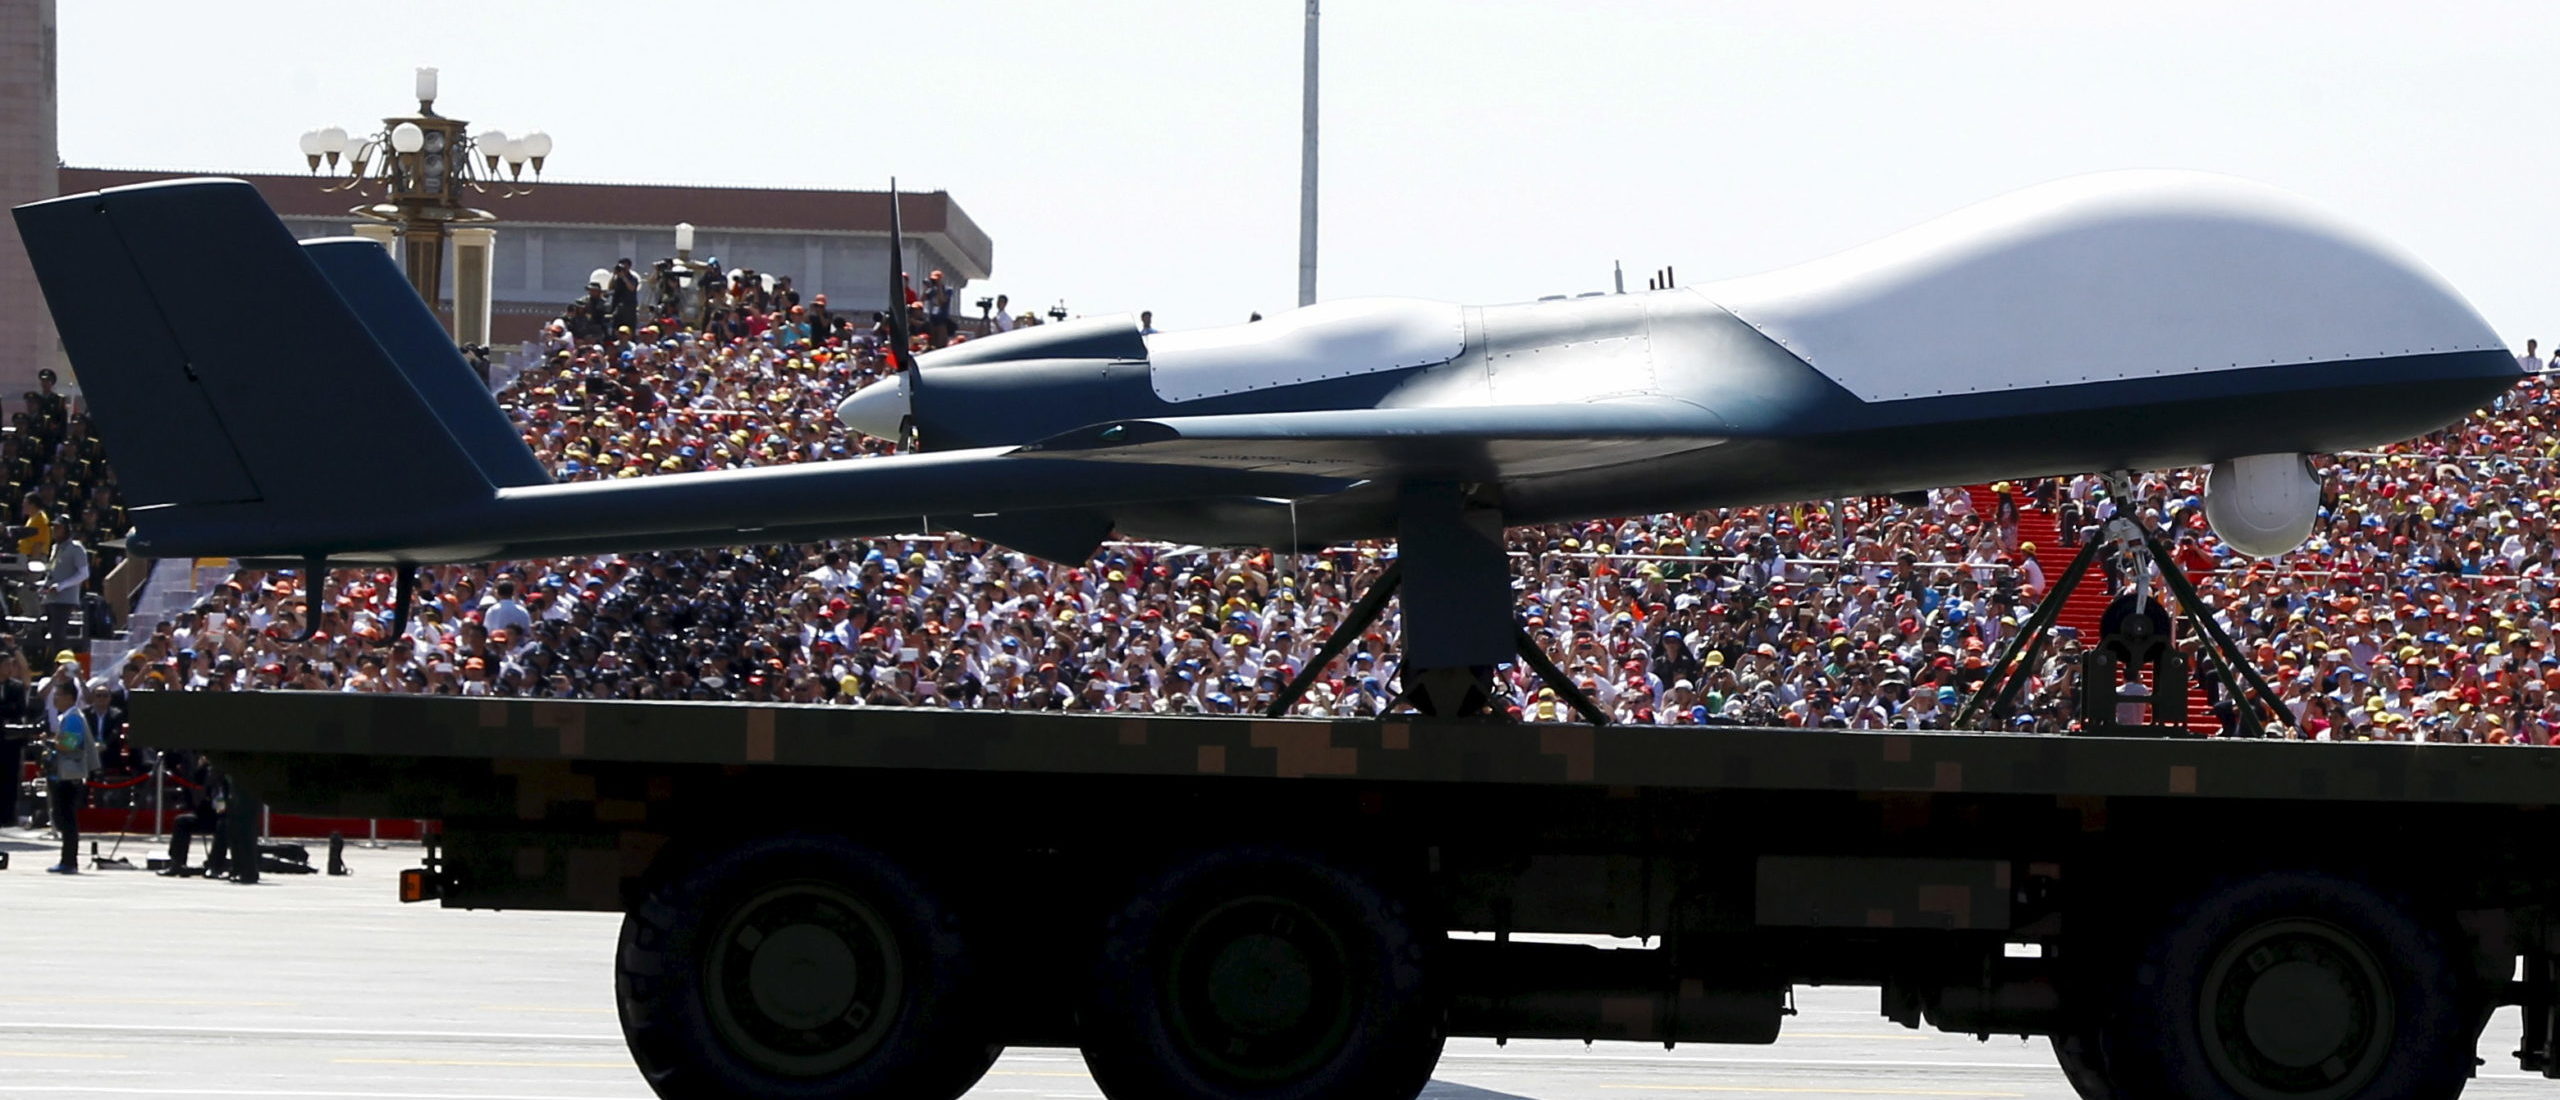 An unmanned aerial vehicle is presented during the military parade marking the 70th anniversary of the end of World War Two, in Beijing, China, September 3, 2015. (REUTERS/Rolex Dela Pena/Pool)